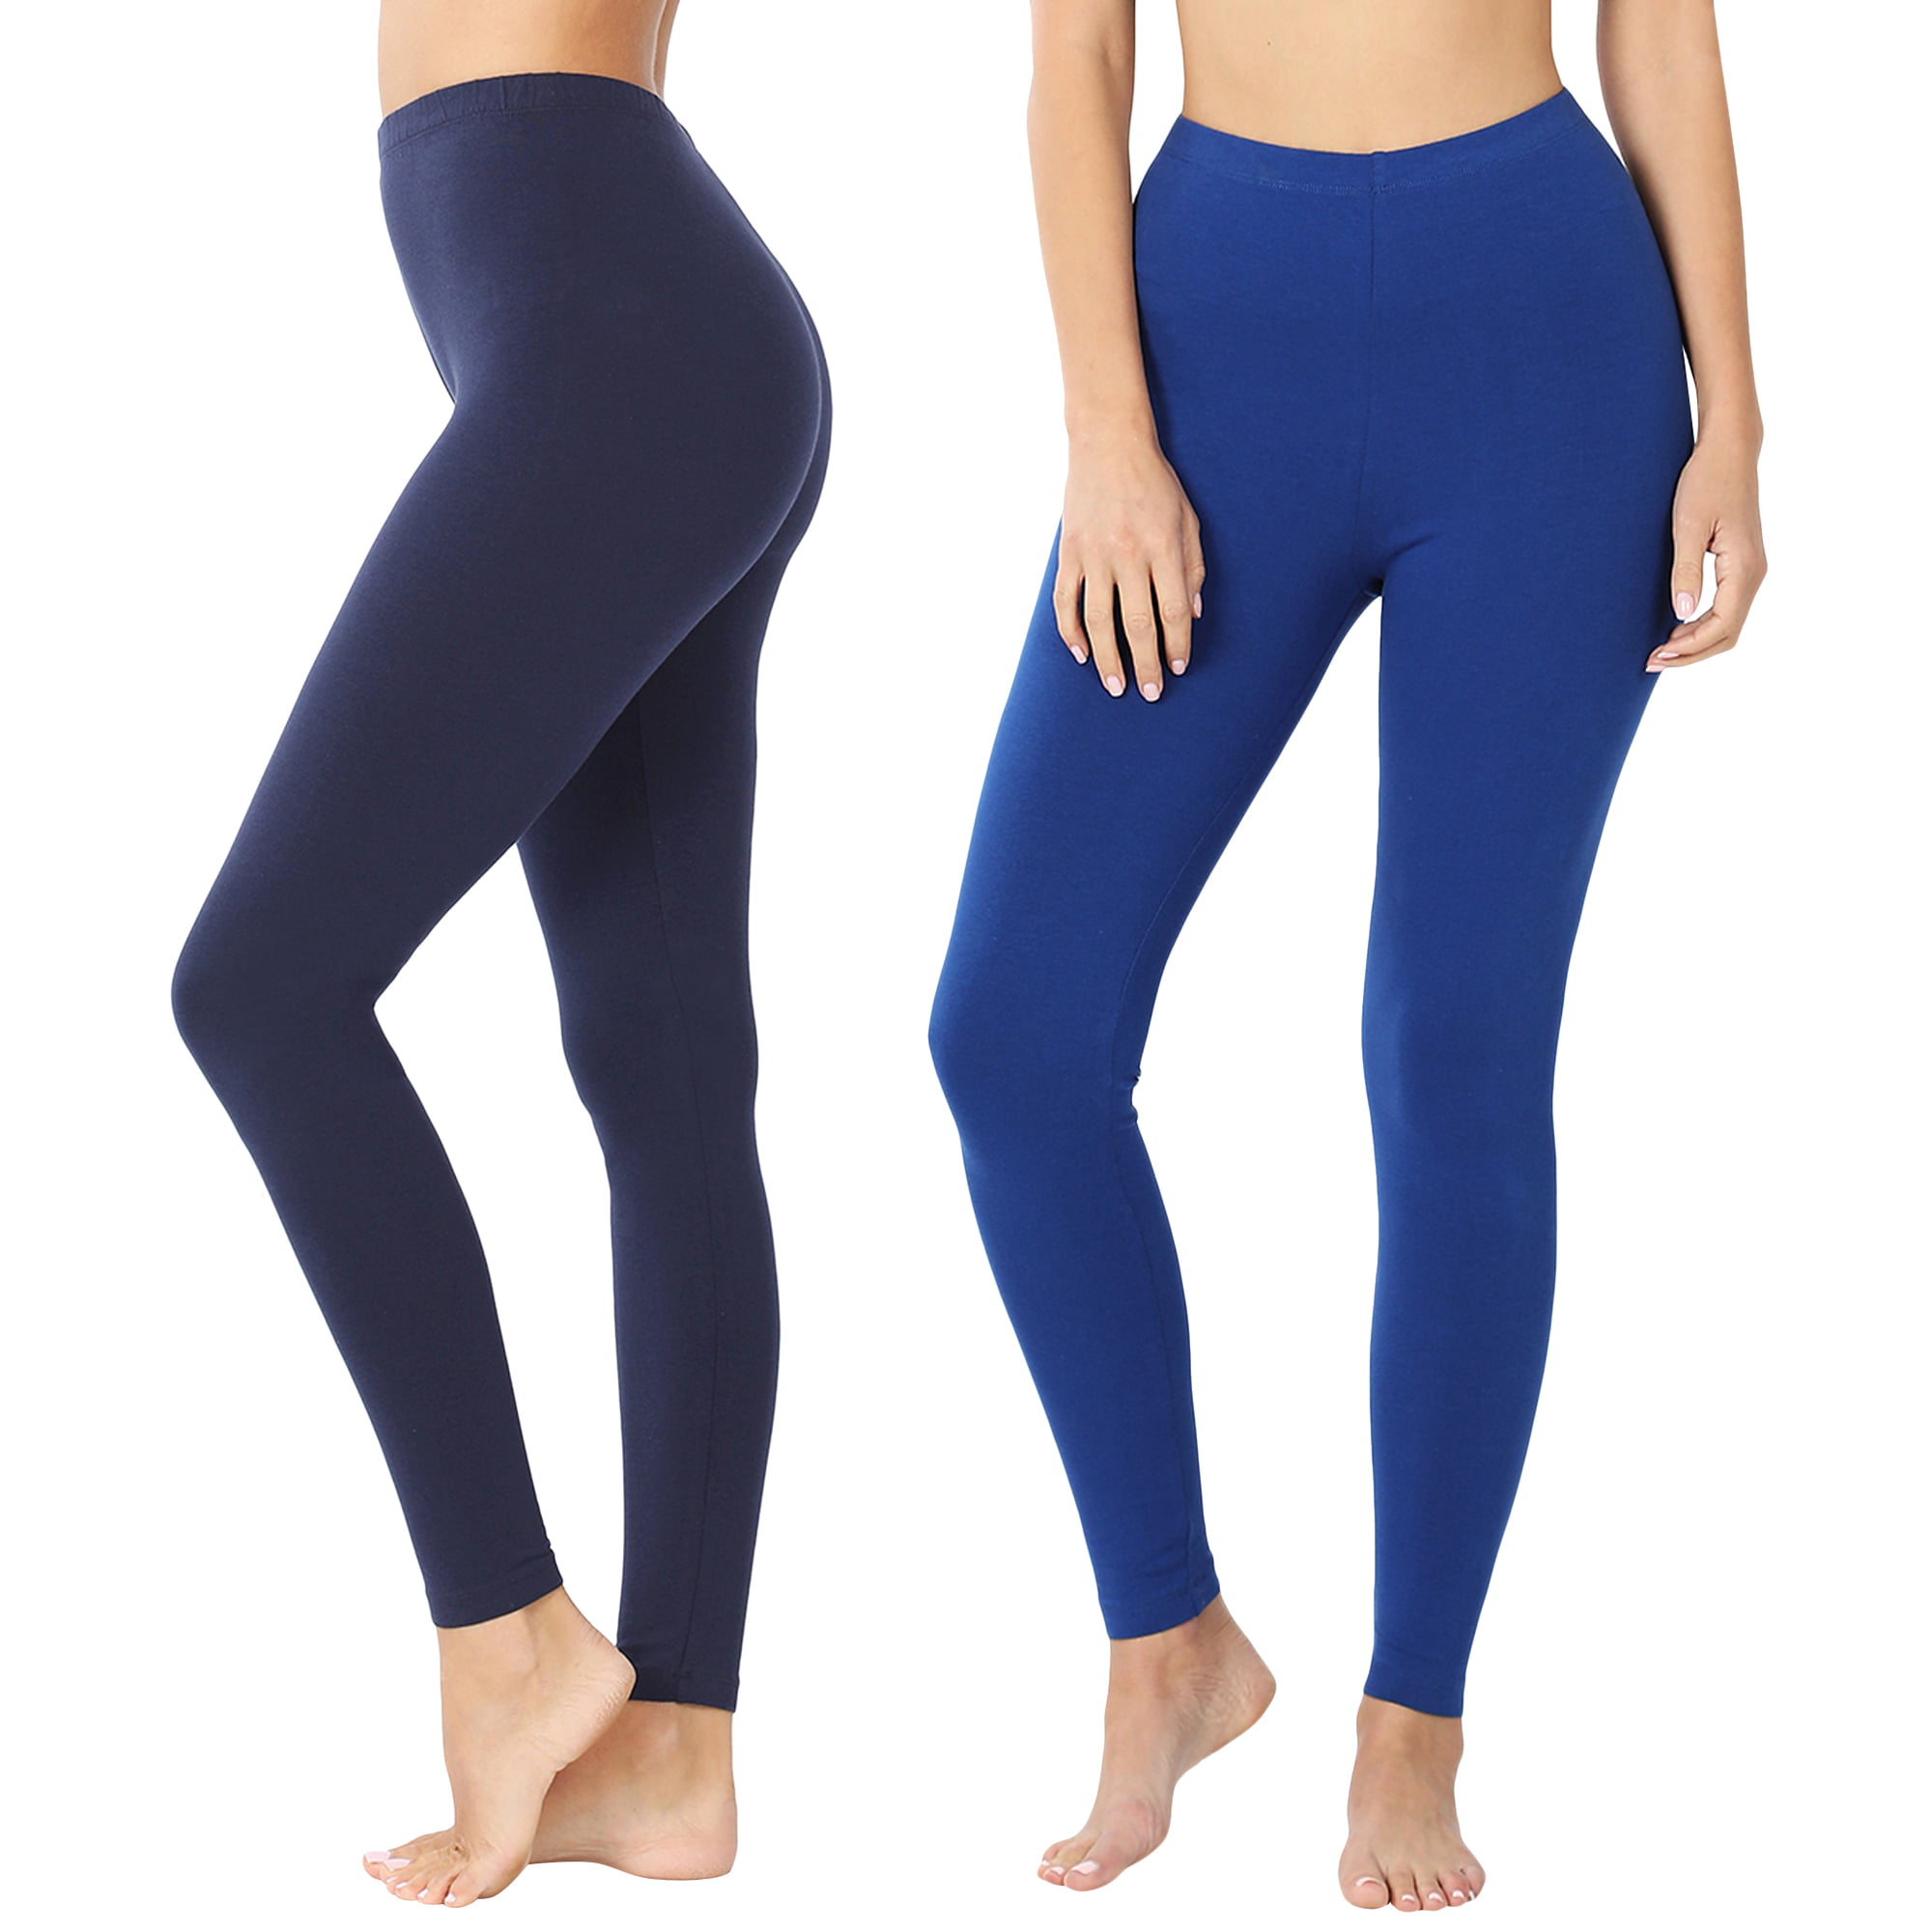 90° DEGREE BY REFLEX: High Waist Cotton Ankle Length Compression Legging 